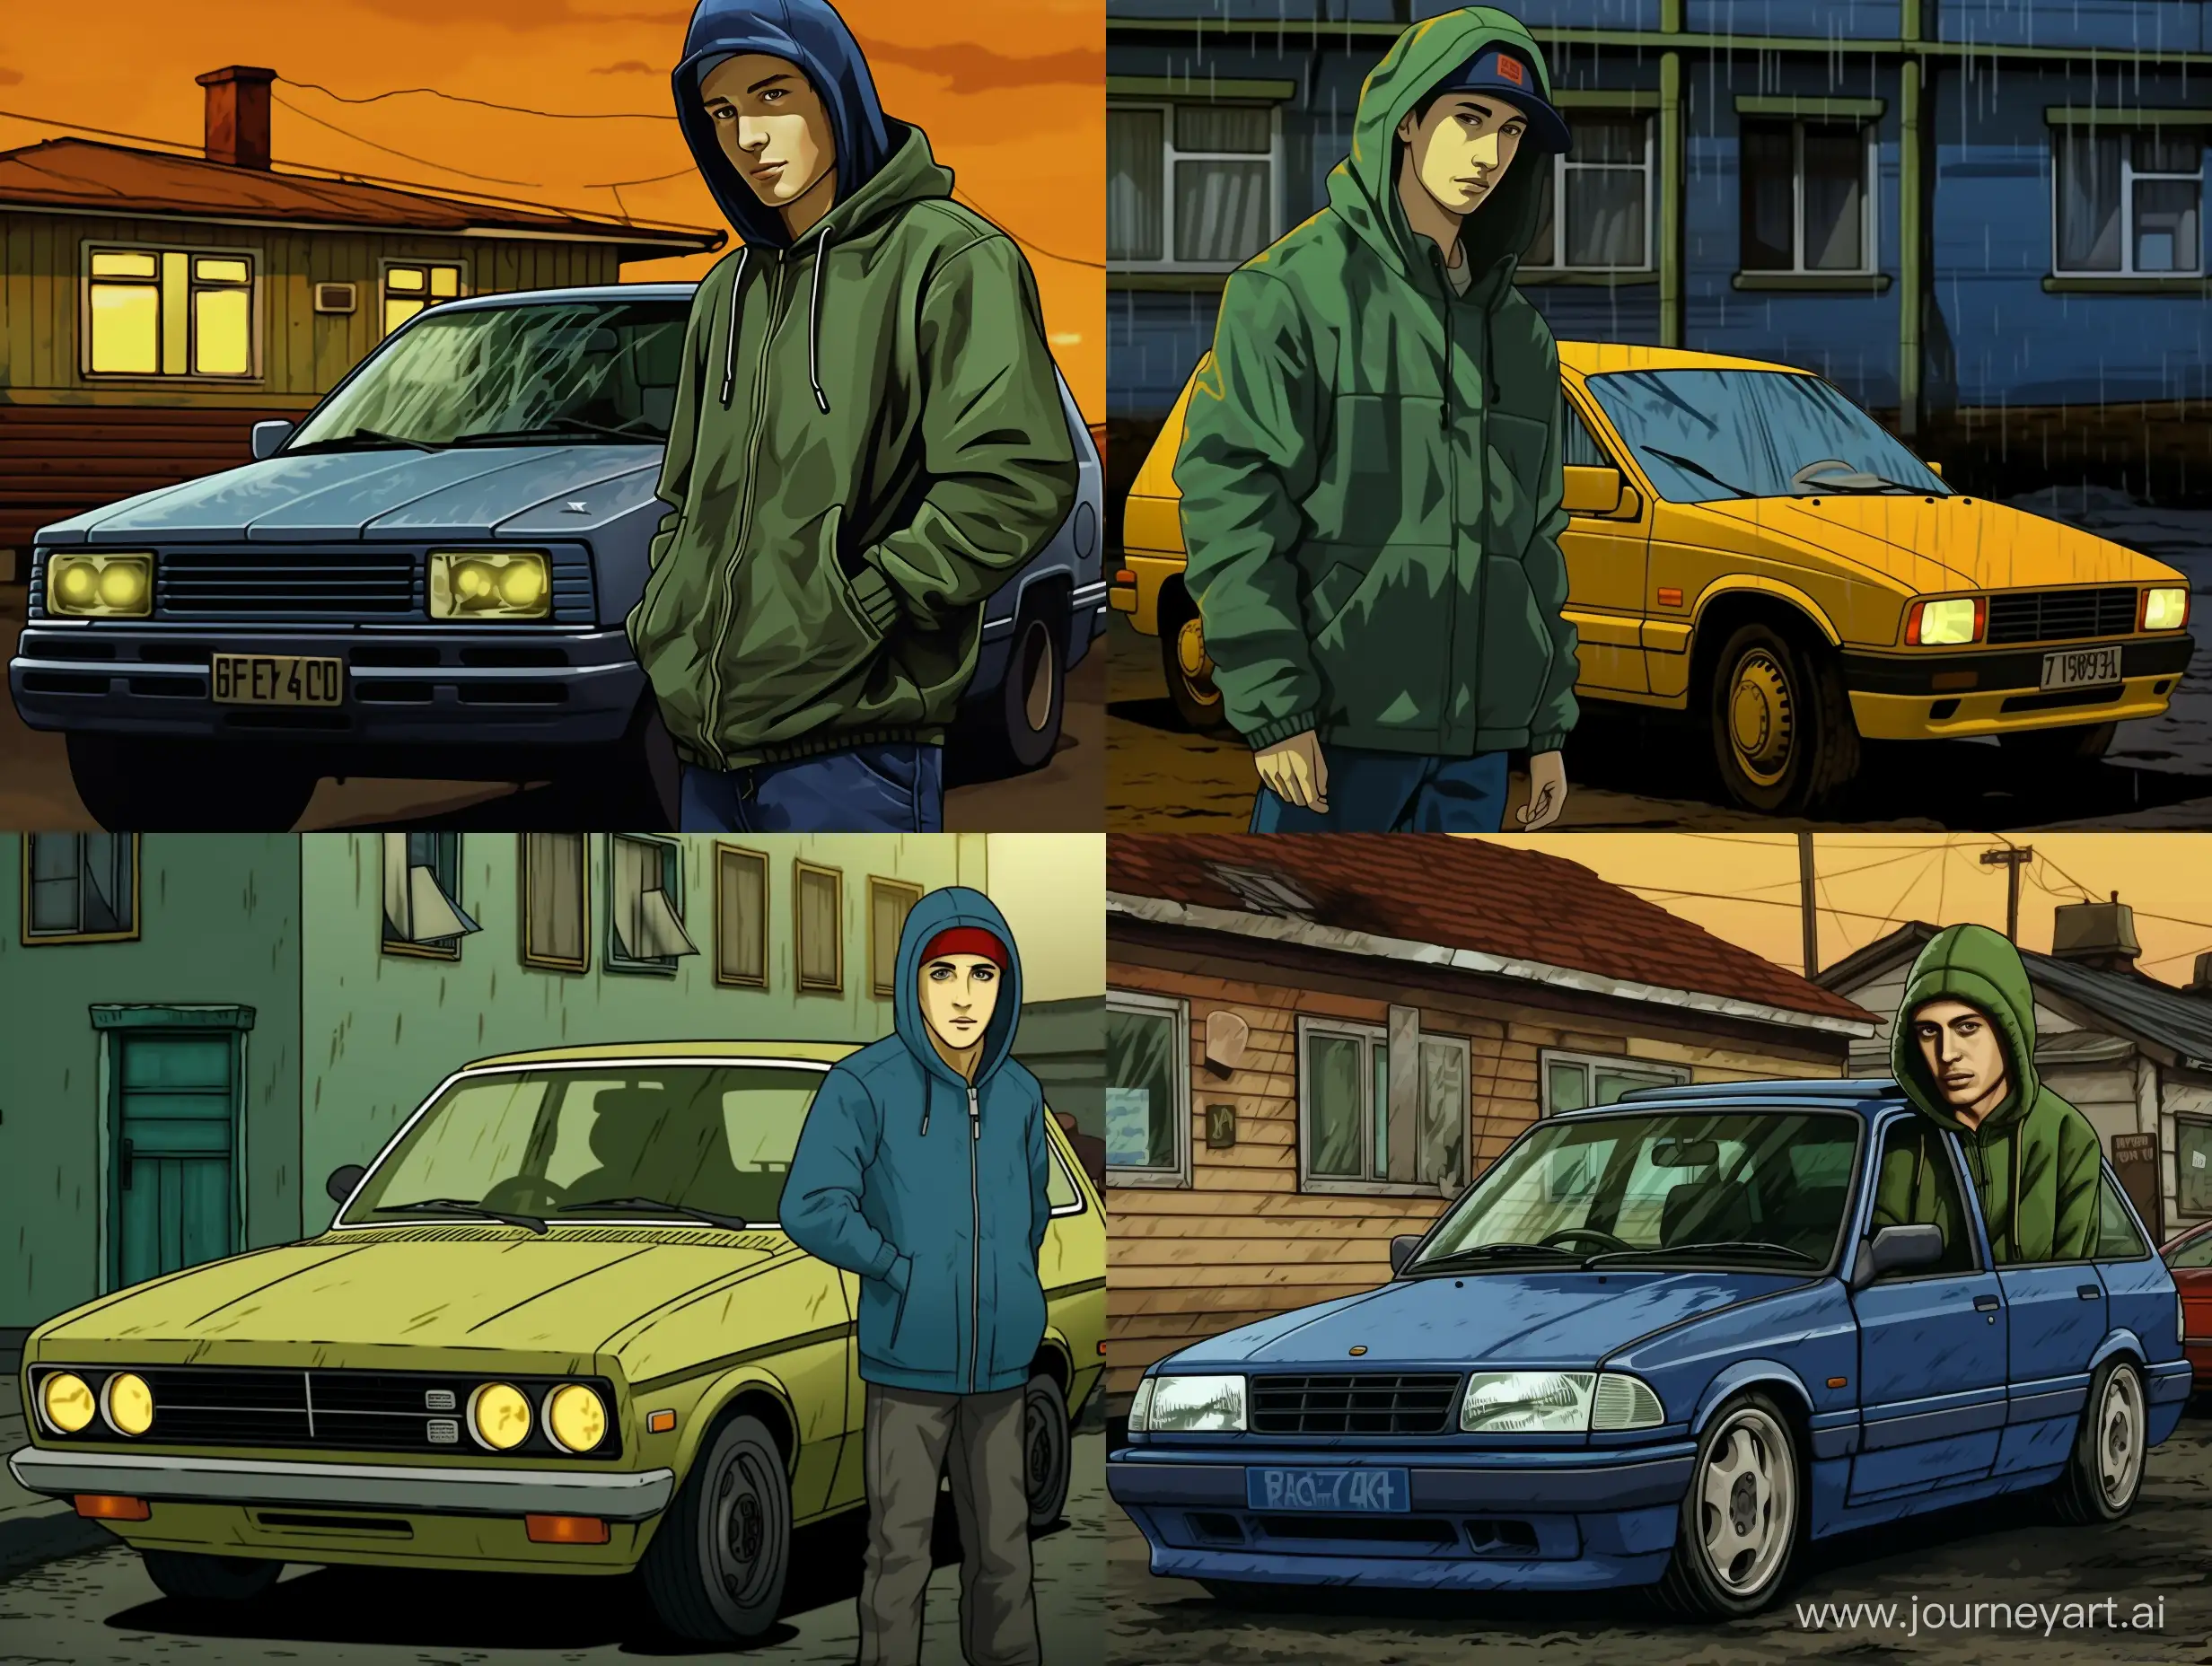 A fat teenager weared in green hoodie with japanese word print in middle of hoodie is standing next to an old liftback sedan model of a dark green metallic 2003 Dacia Solenza. The yellow halogen headlights of this car shine brightly. The action takes place on a dark street in a residential area of an Eastern European city